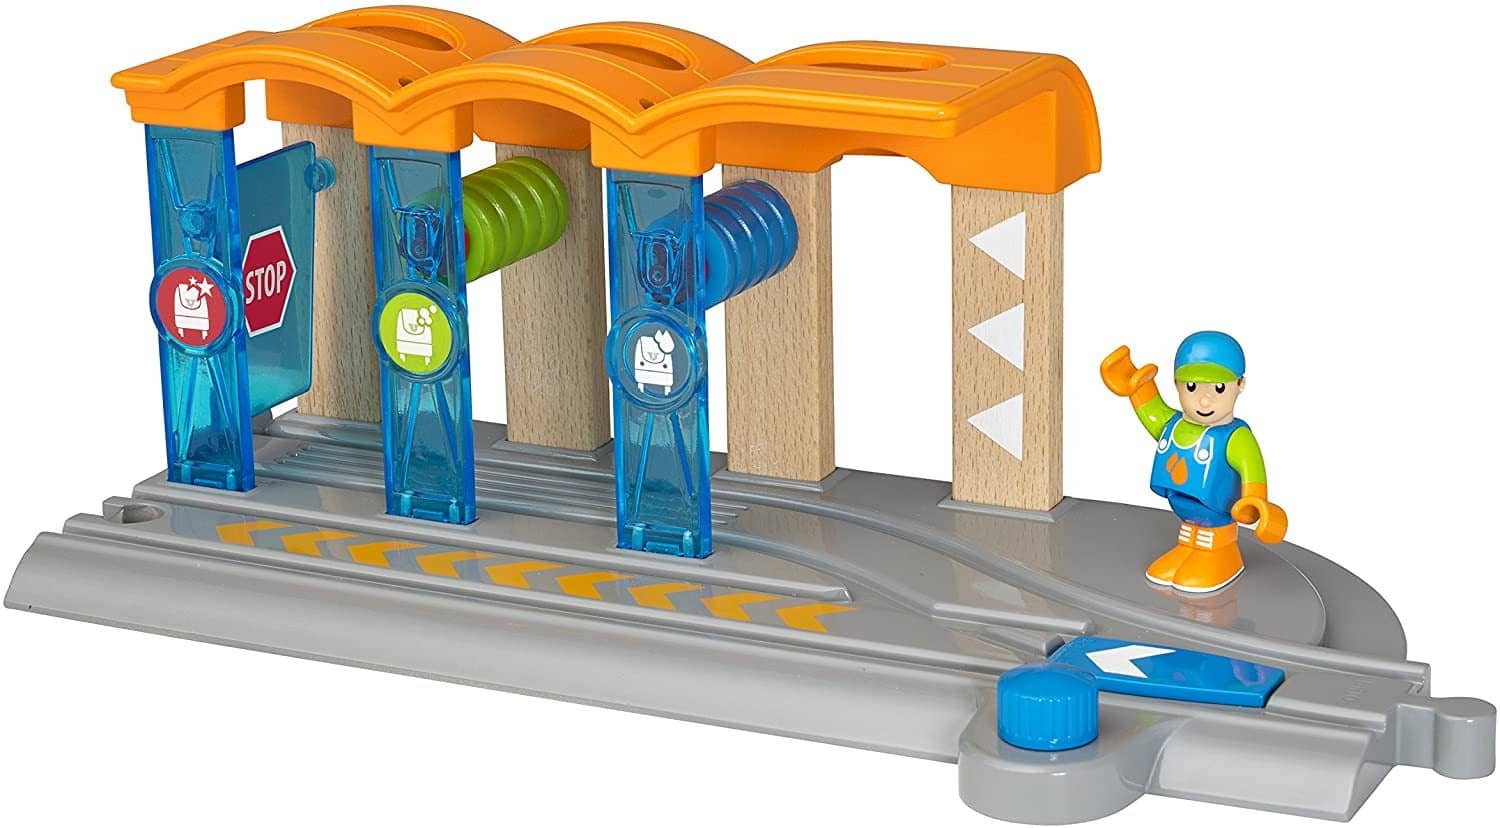 Brio World - 33213 Remote Control Train Engine | 2 Piece Train Toy For Kids  Ages 3 And Up